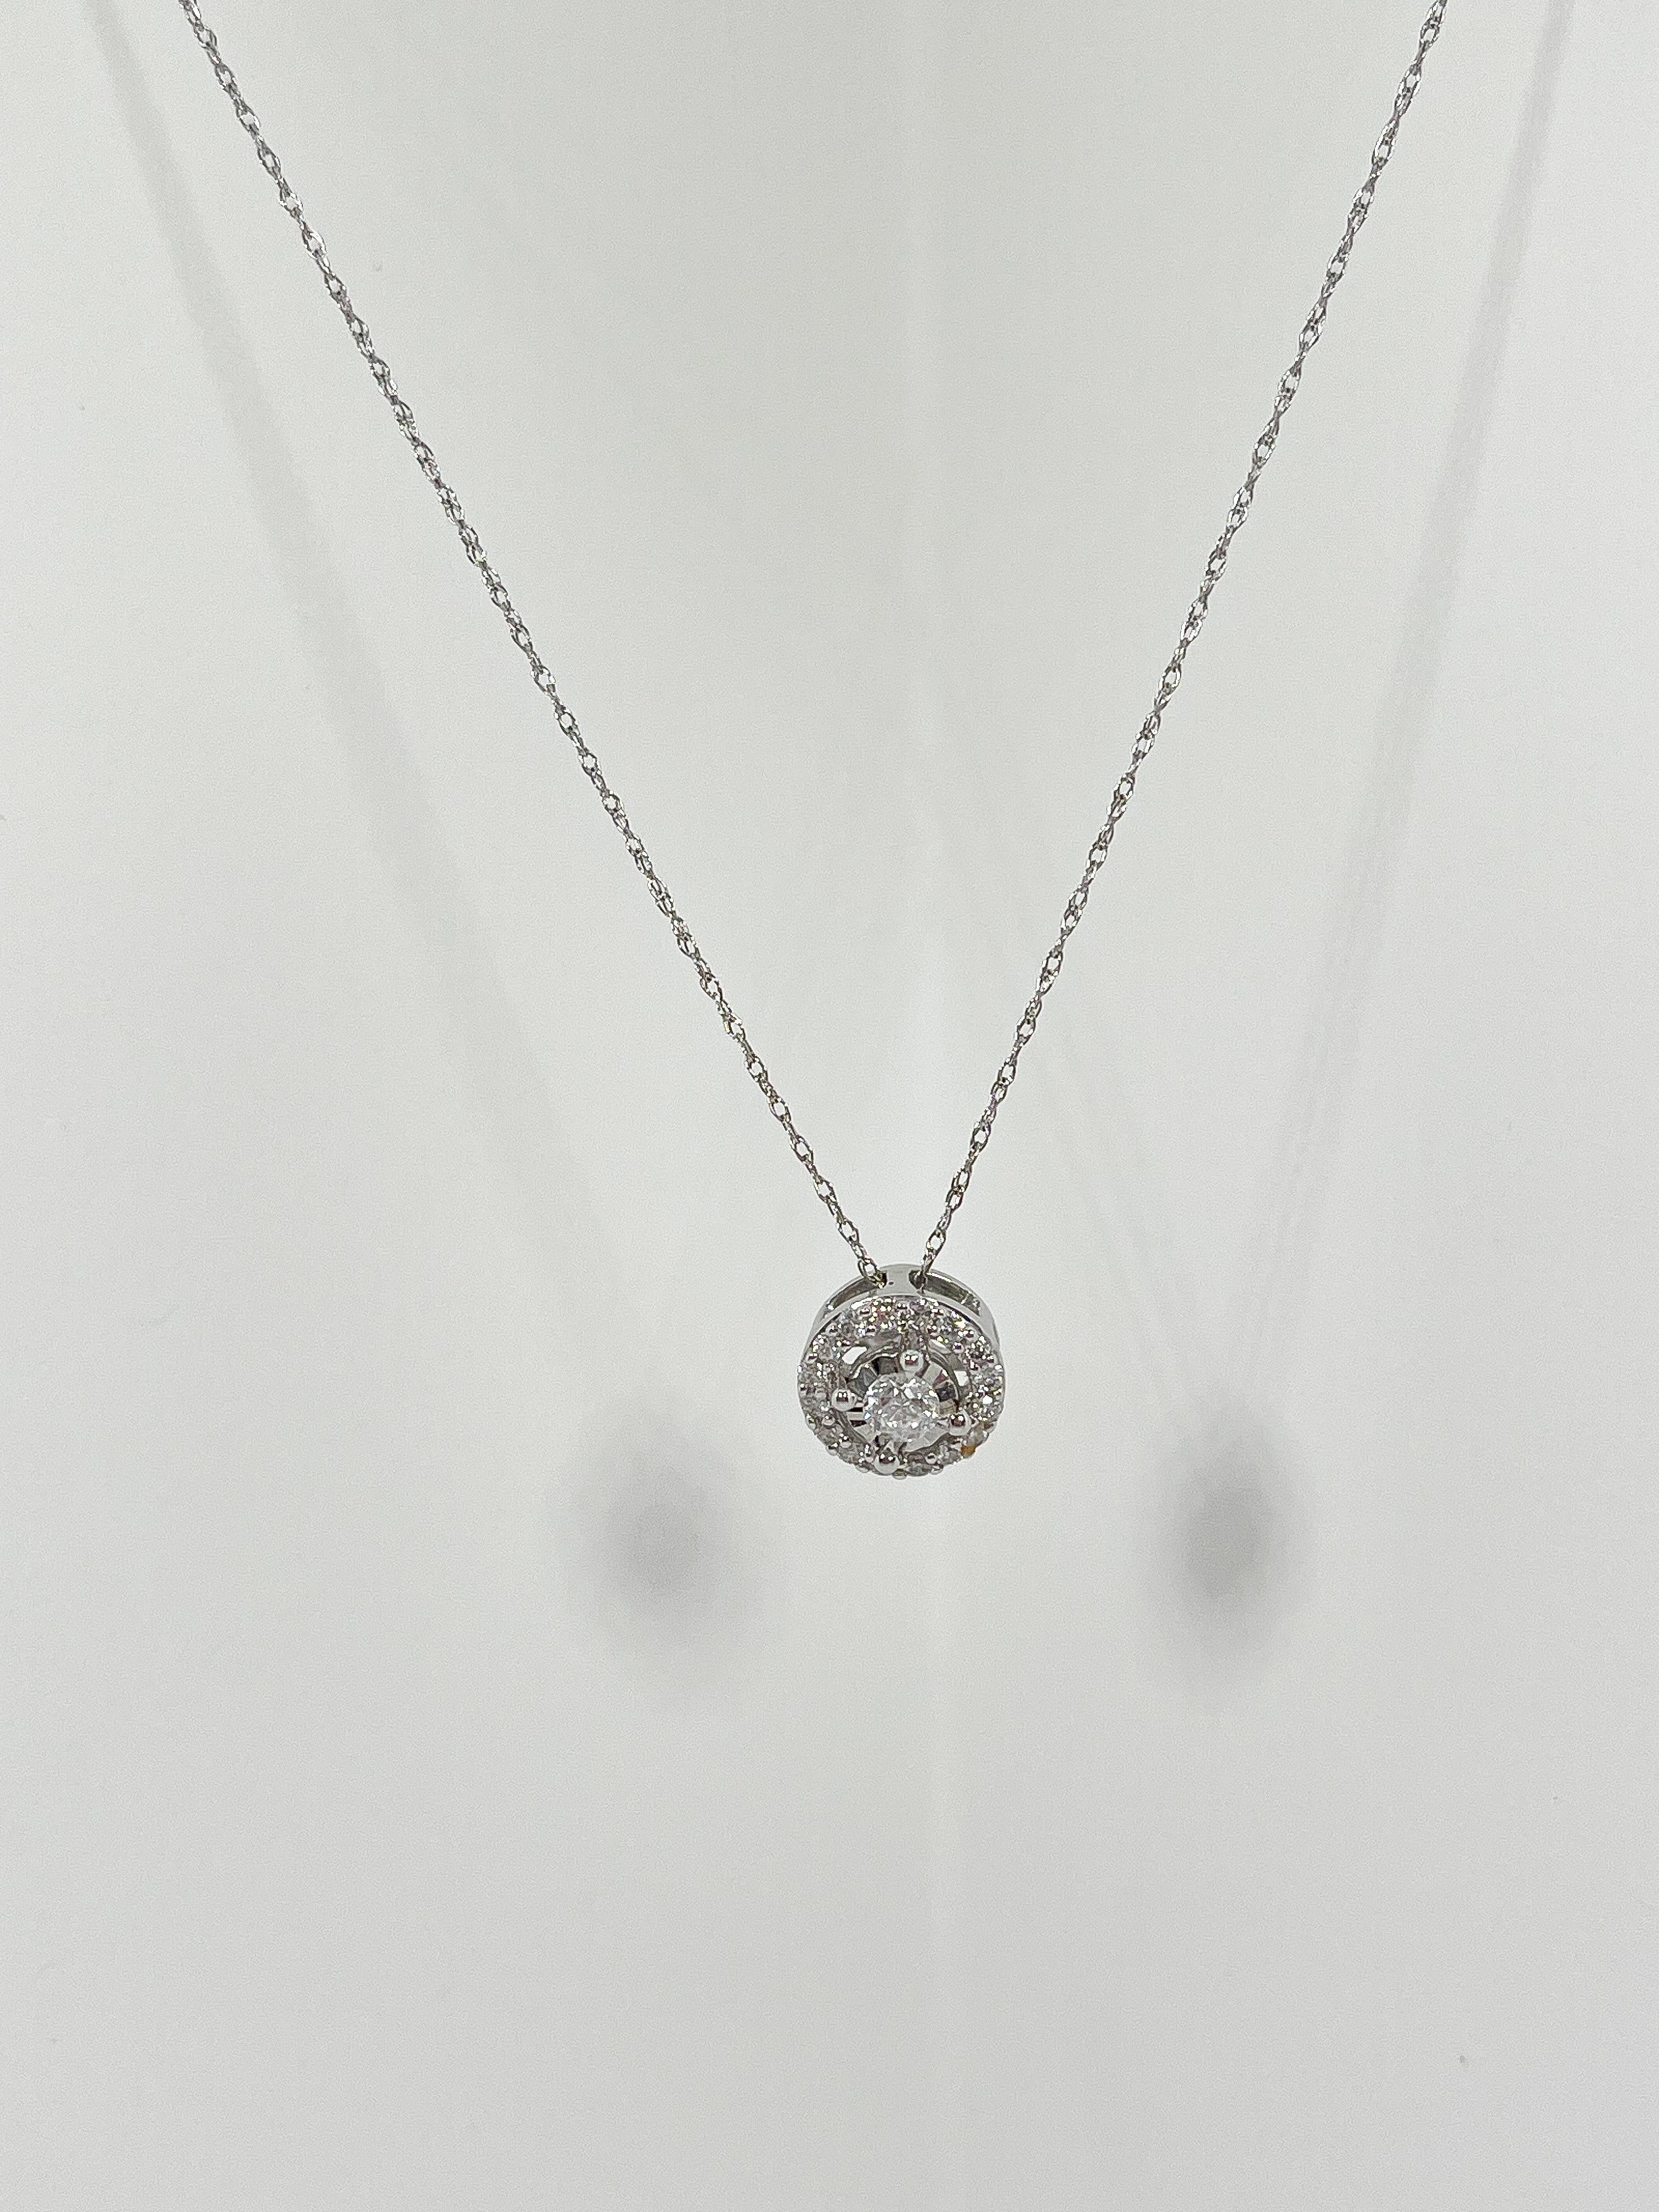 14k white gold .50 CTW diamond halo pendant necklace. Pendant comes on a Singapore chain, has a diameter of 9.1, the necklace has a length of 18 inches, and a total weight of 1.87.